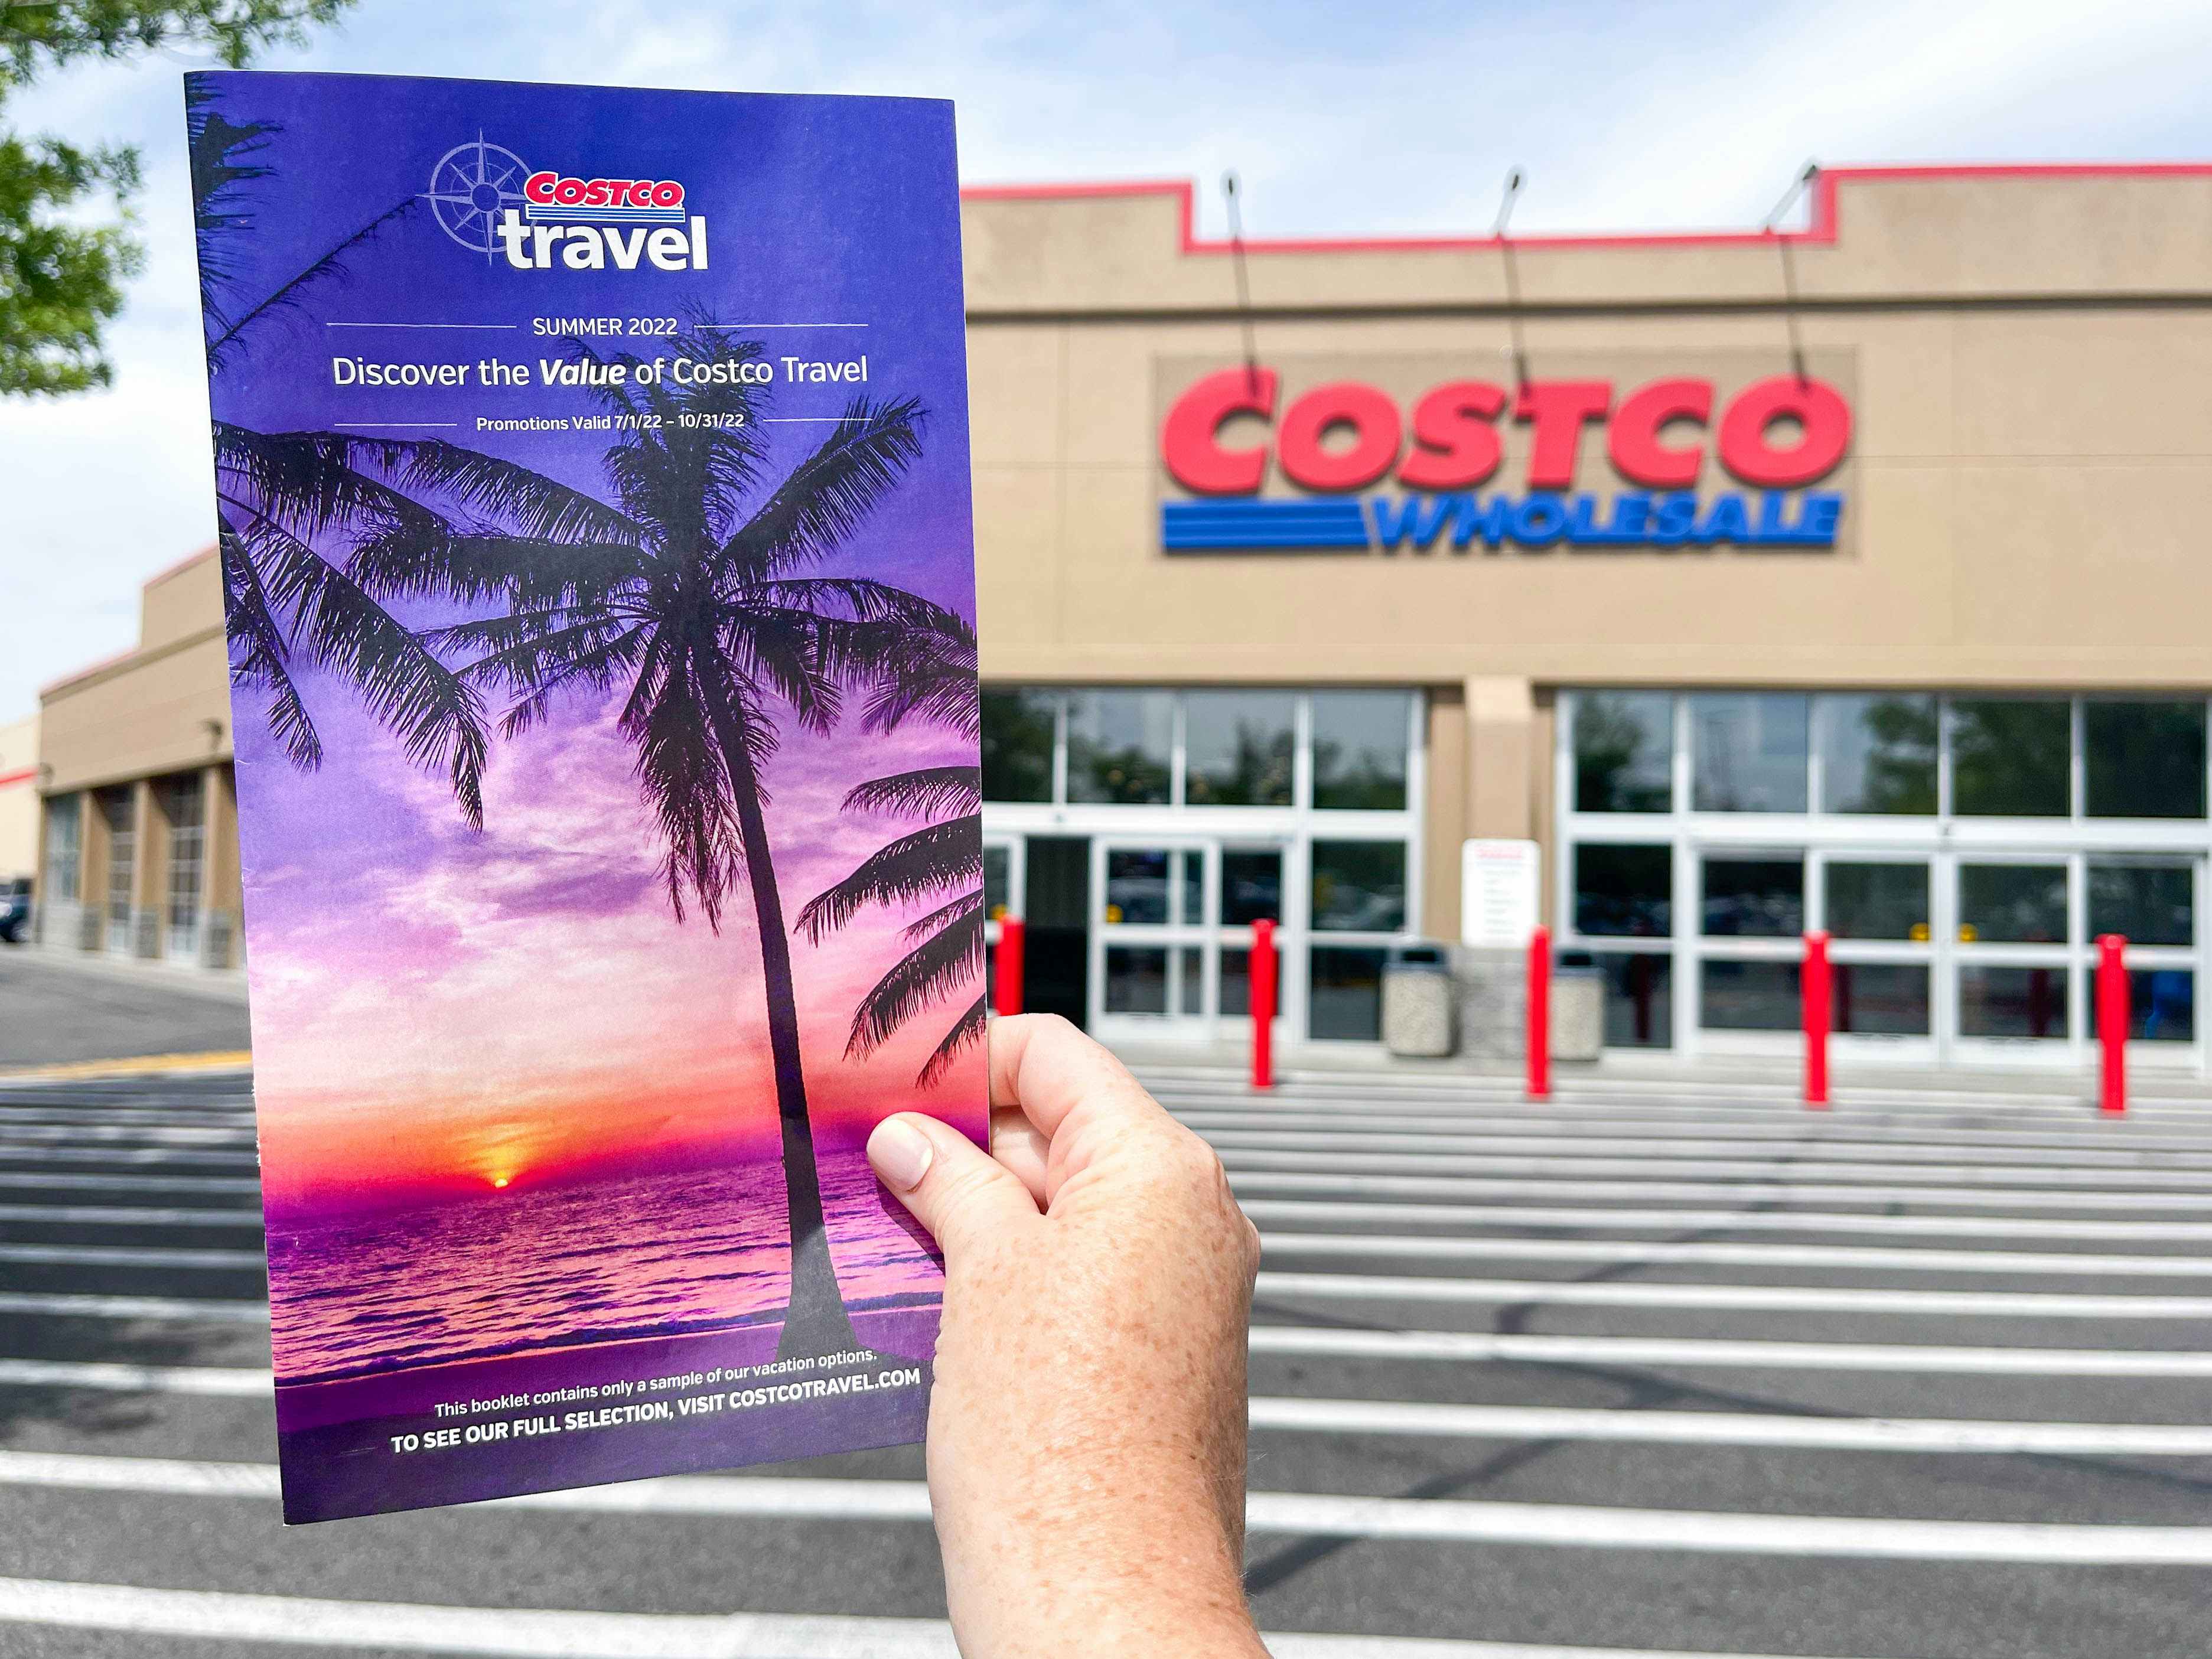 costco travel brochures on being held in front of store